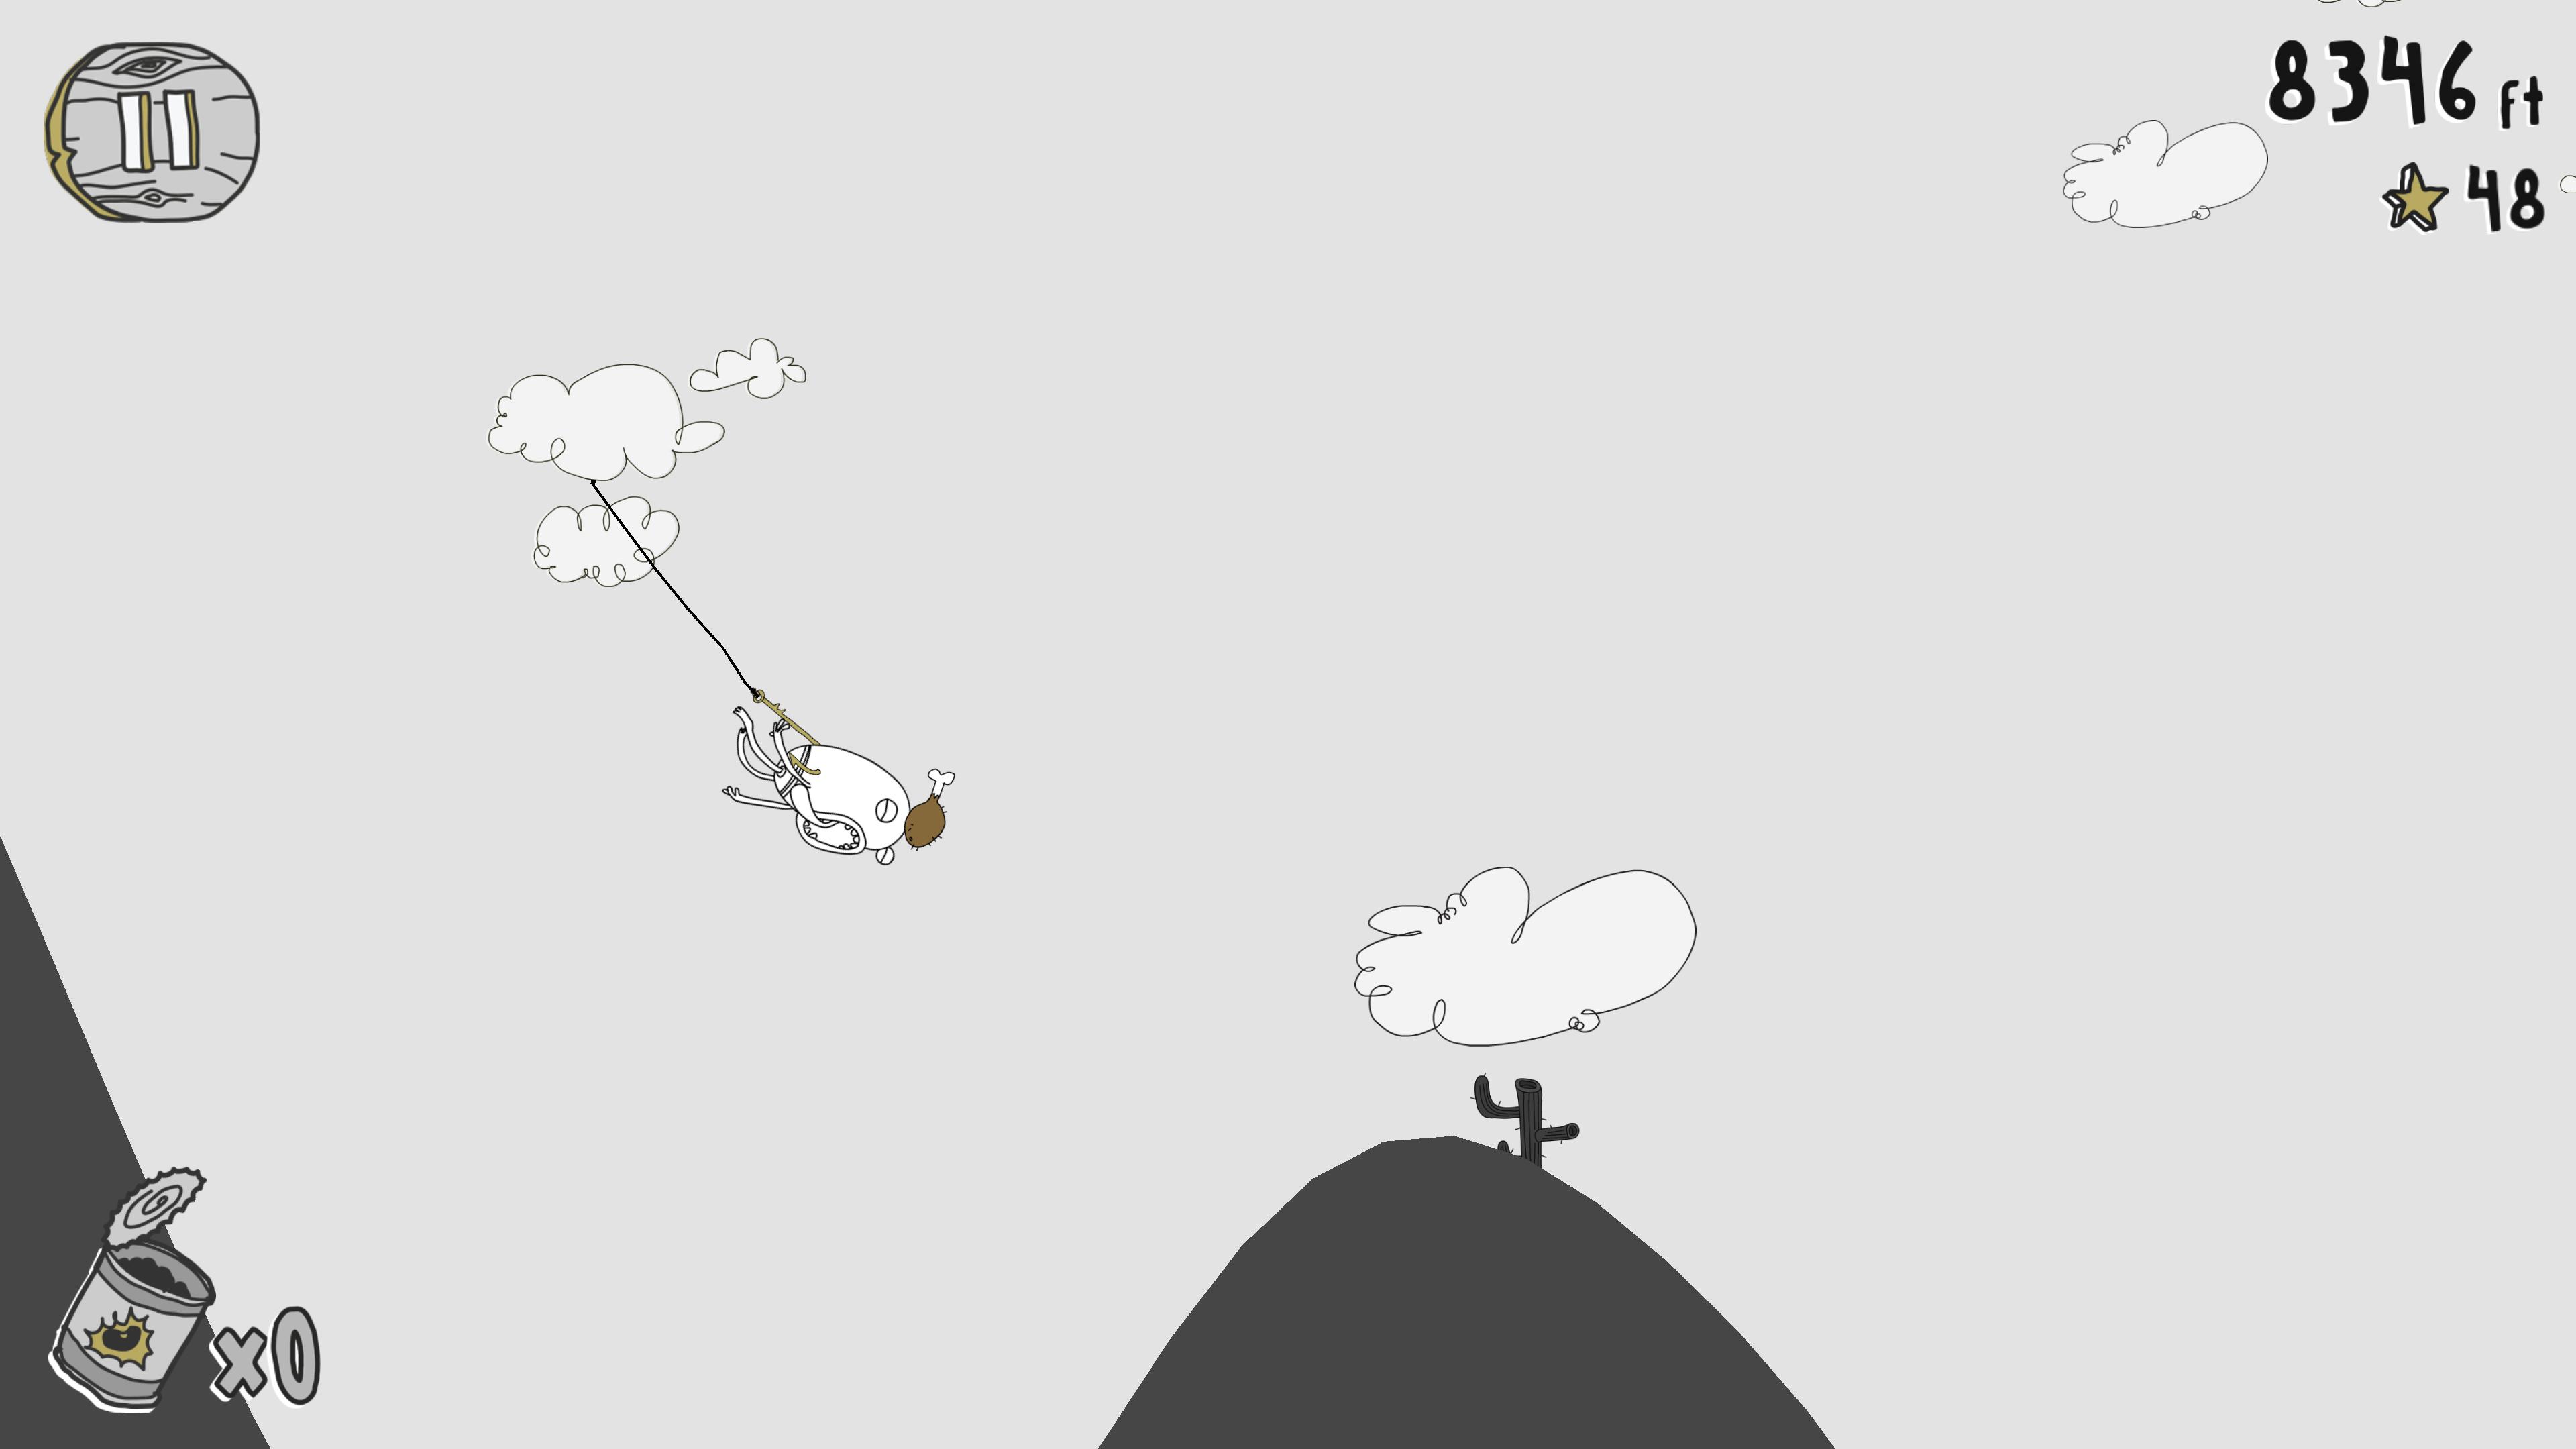 Doofus Drop Silly Rider - Learn to Fart & Fly 1.0.23 Screenshot 16